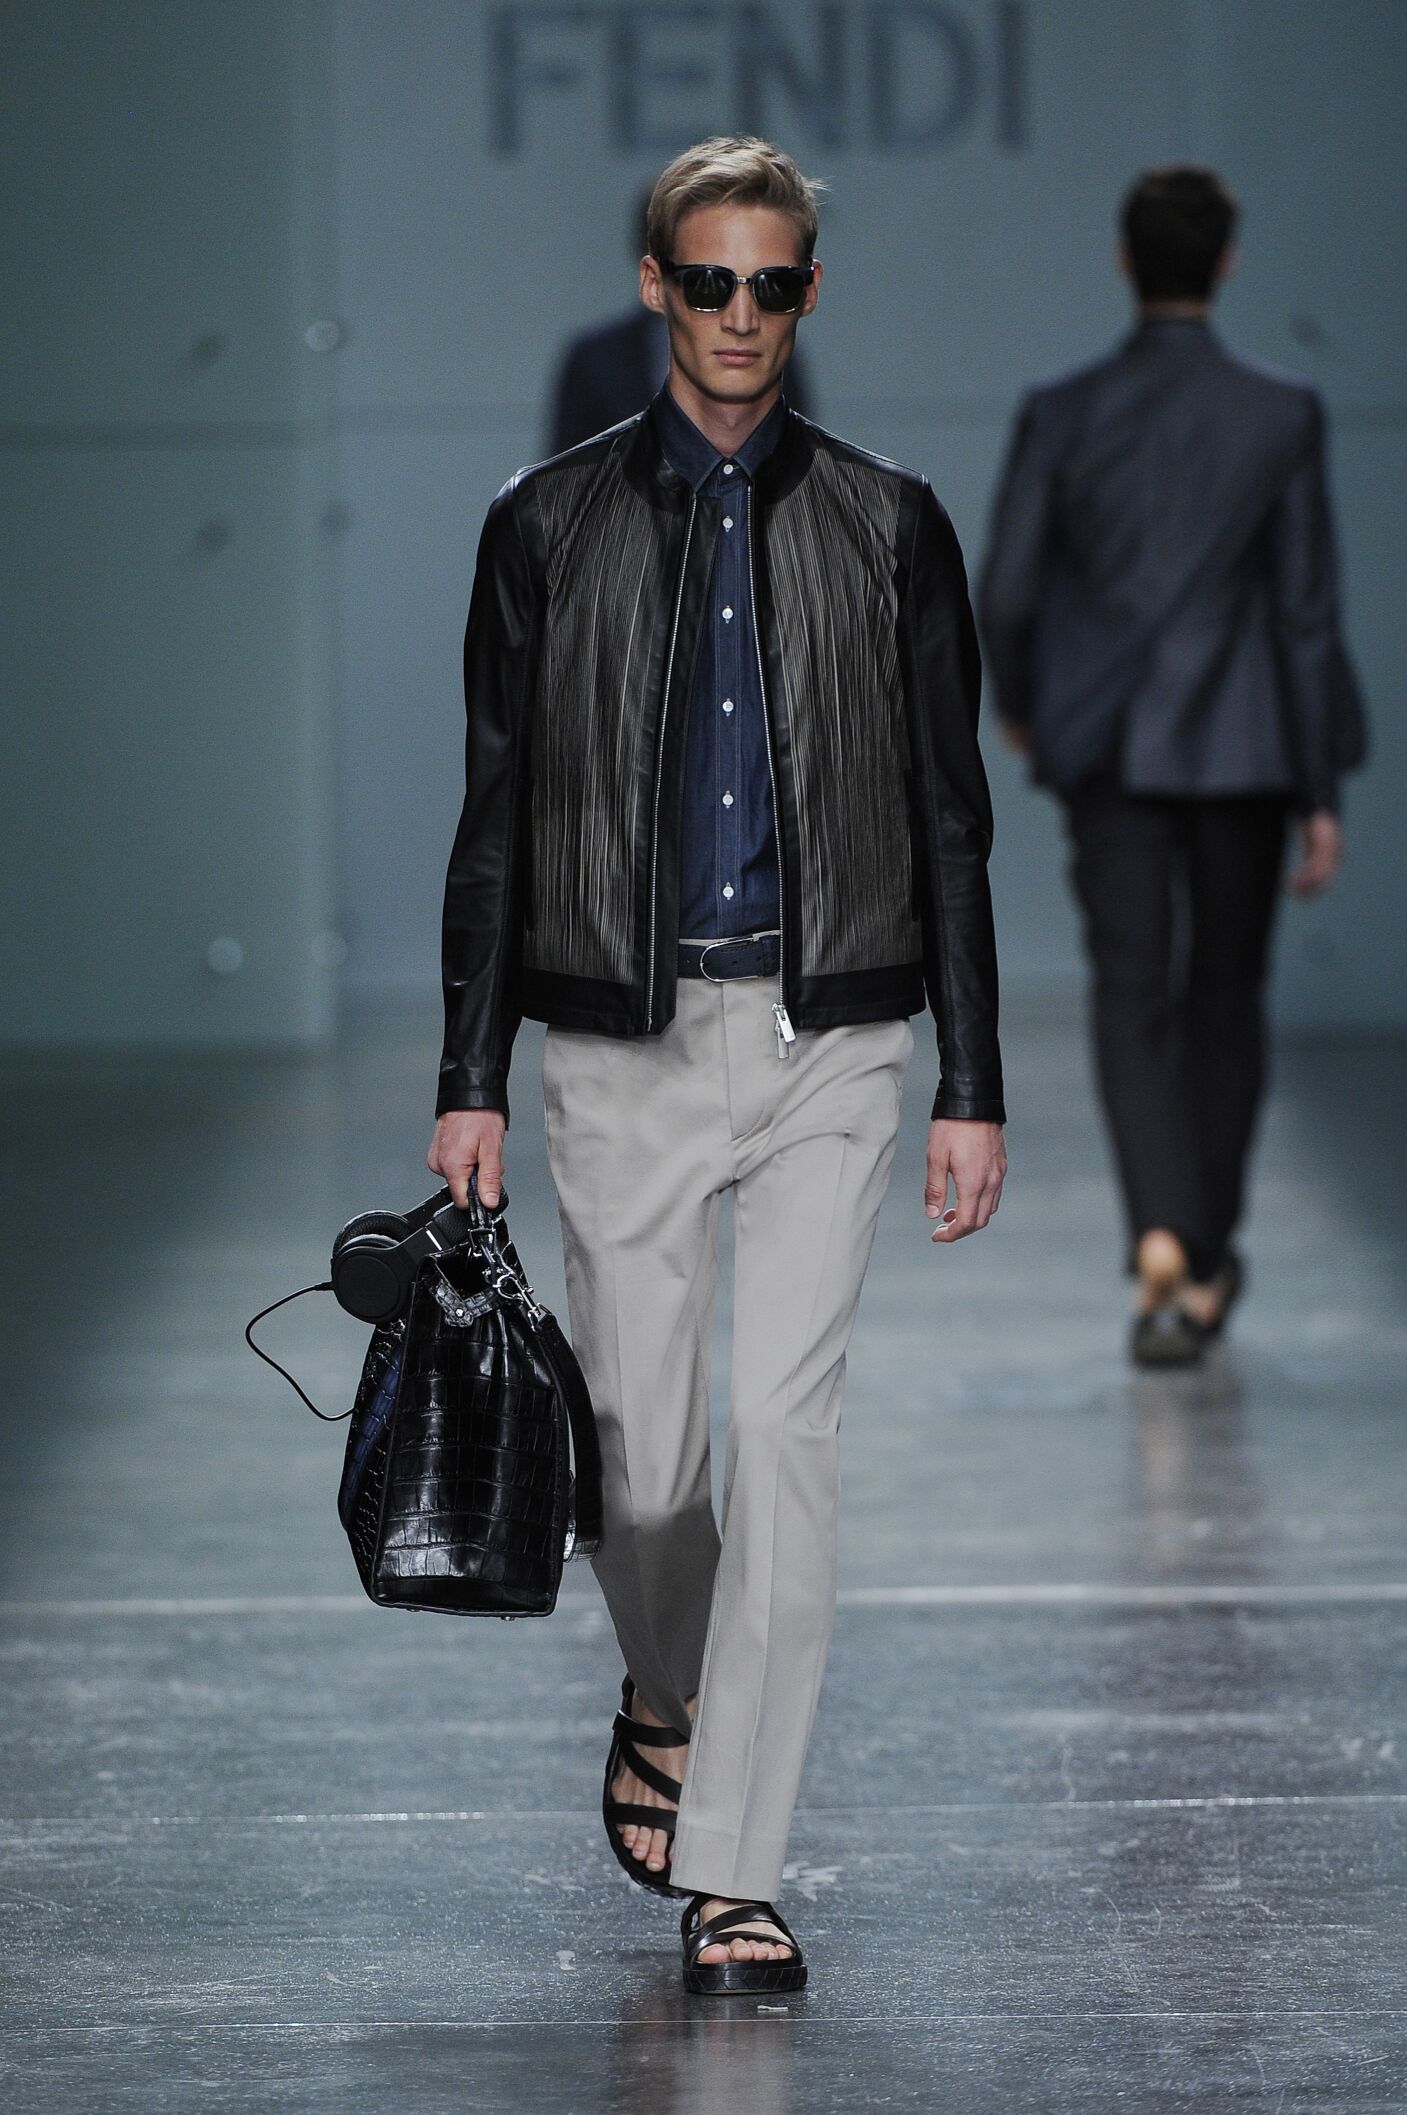 FENDI SPRING SUMMER 2015 MEN'S COLLECTION | The Skinny Beep